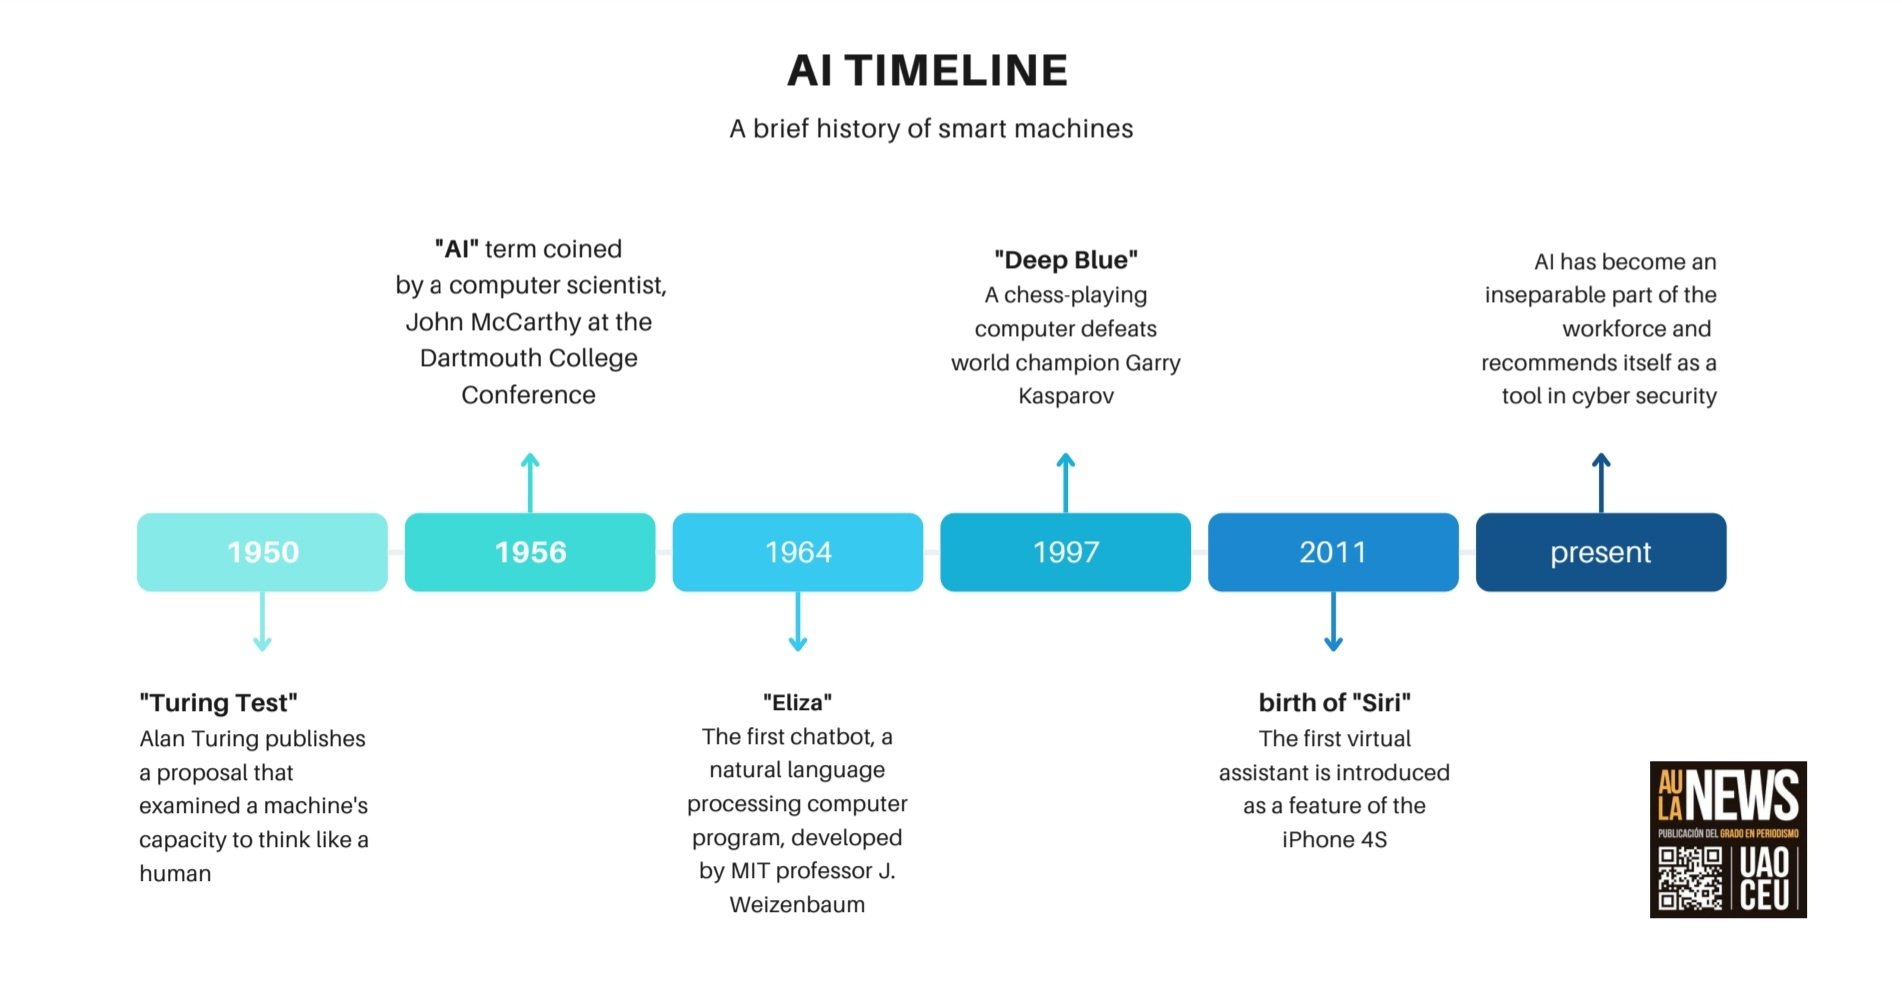 the timeline of AI